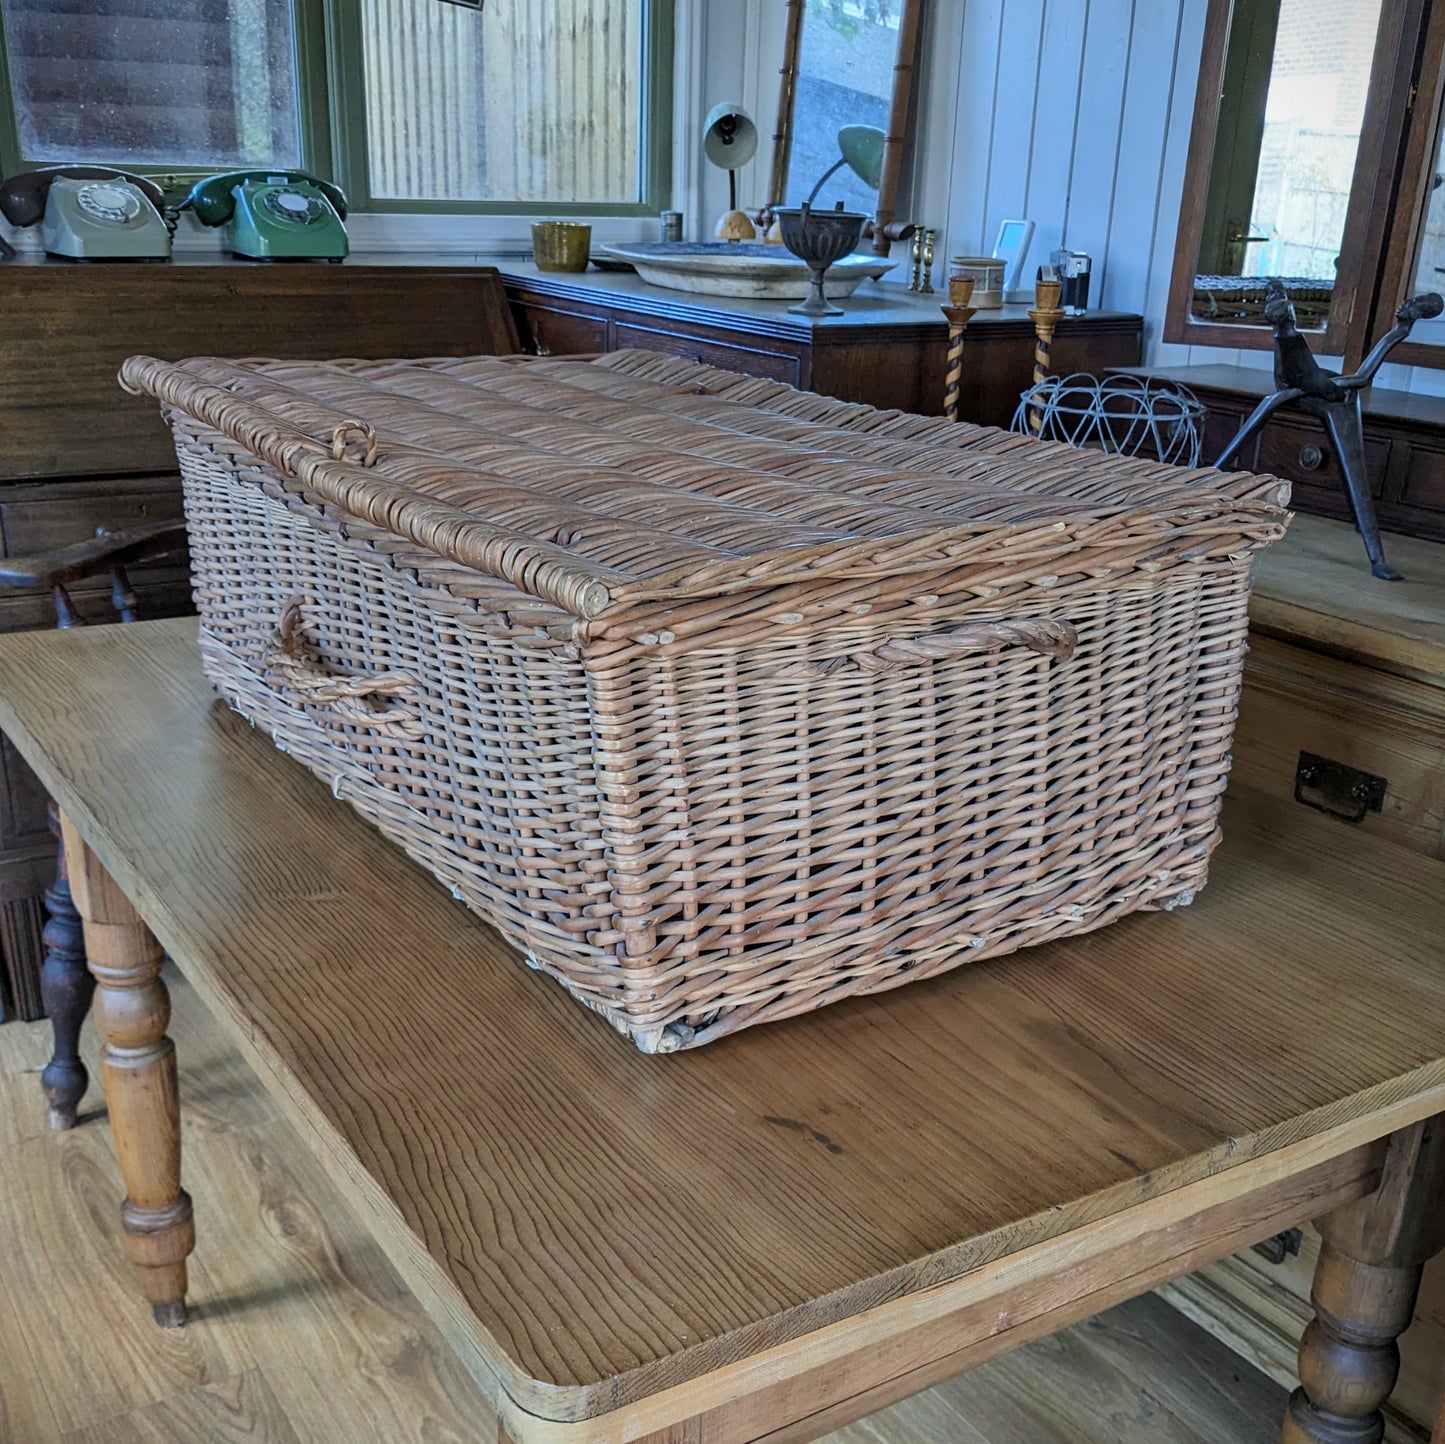 Antique Wicker Basket with Lid